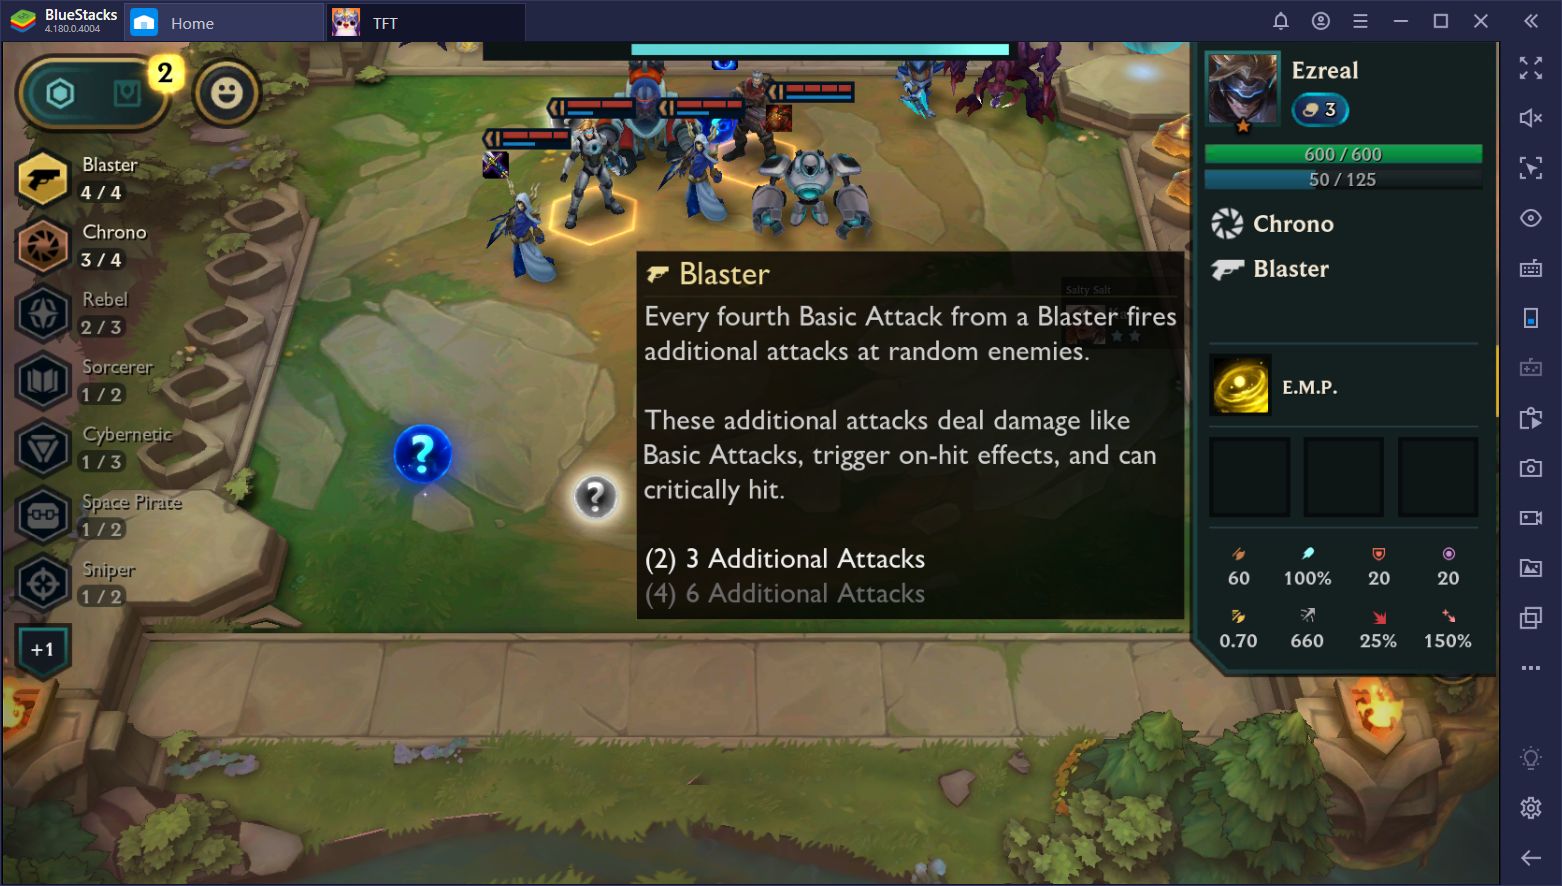 Teamfight Tactics on BlueStacks - The Best Tips and Tricks For Winning Every Match